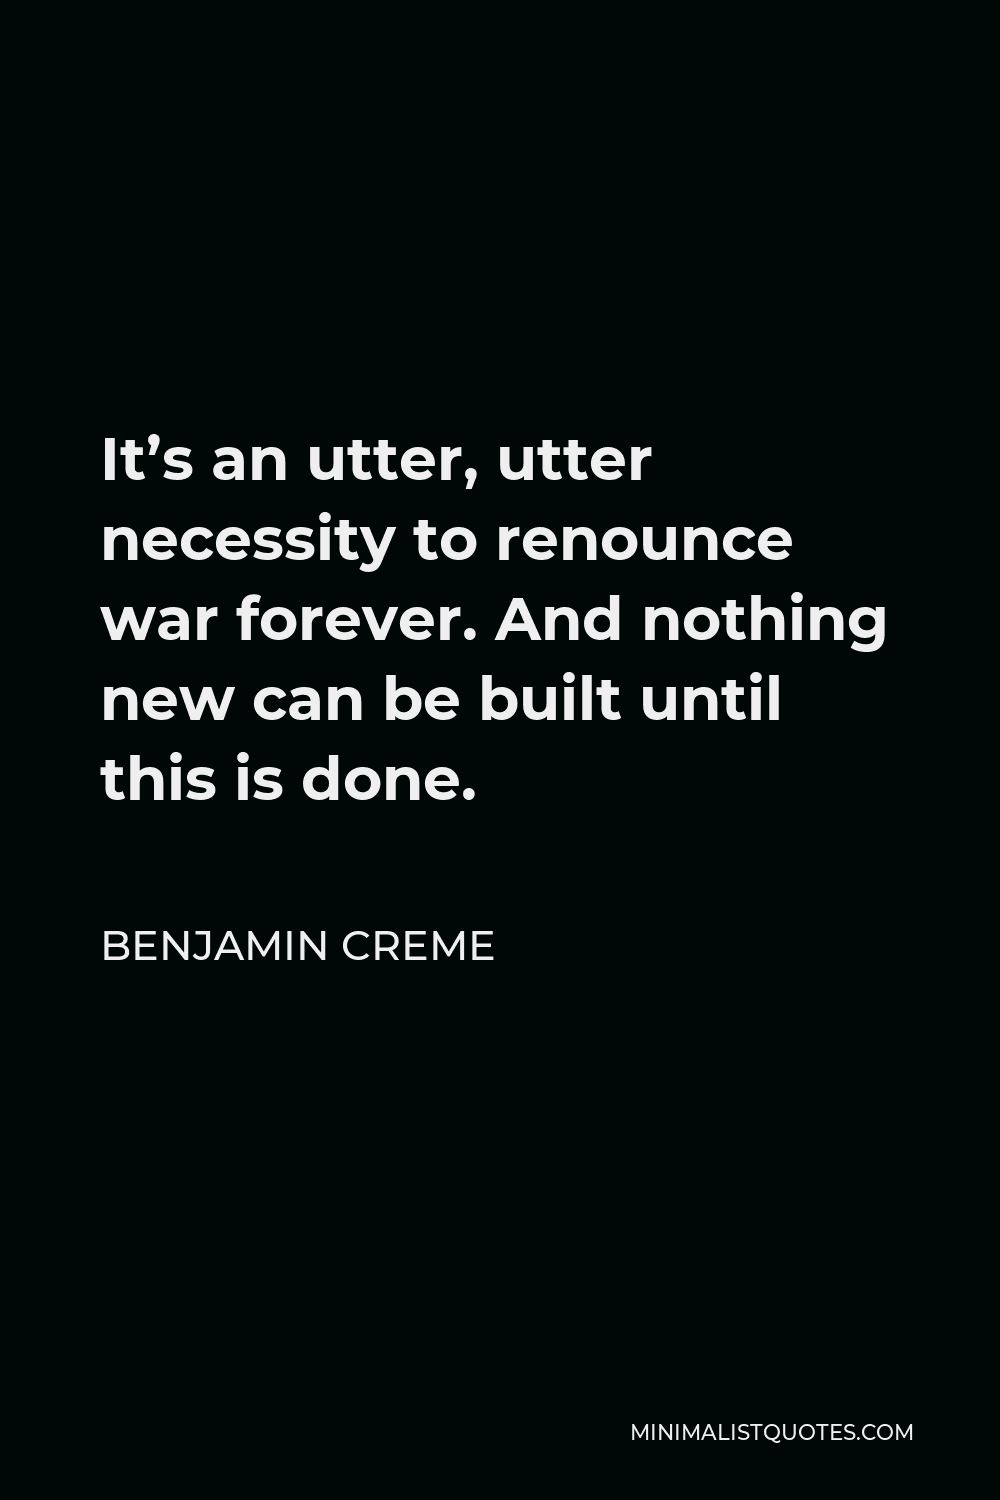 Benjamin Creme Quote - It’s an utter, utter necessity to renounce war forever. And nothing new can be built until this is done.